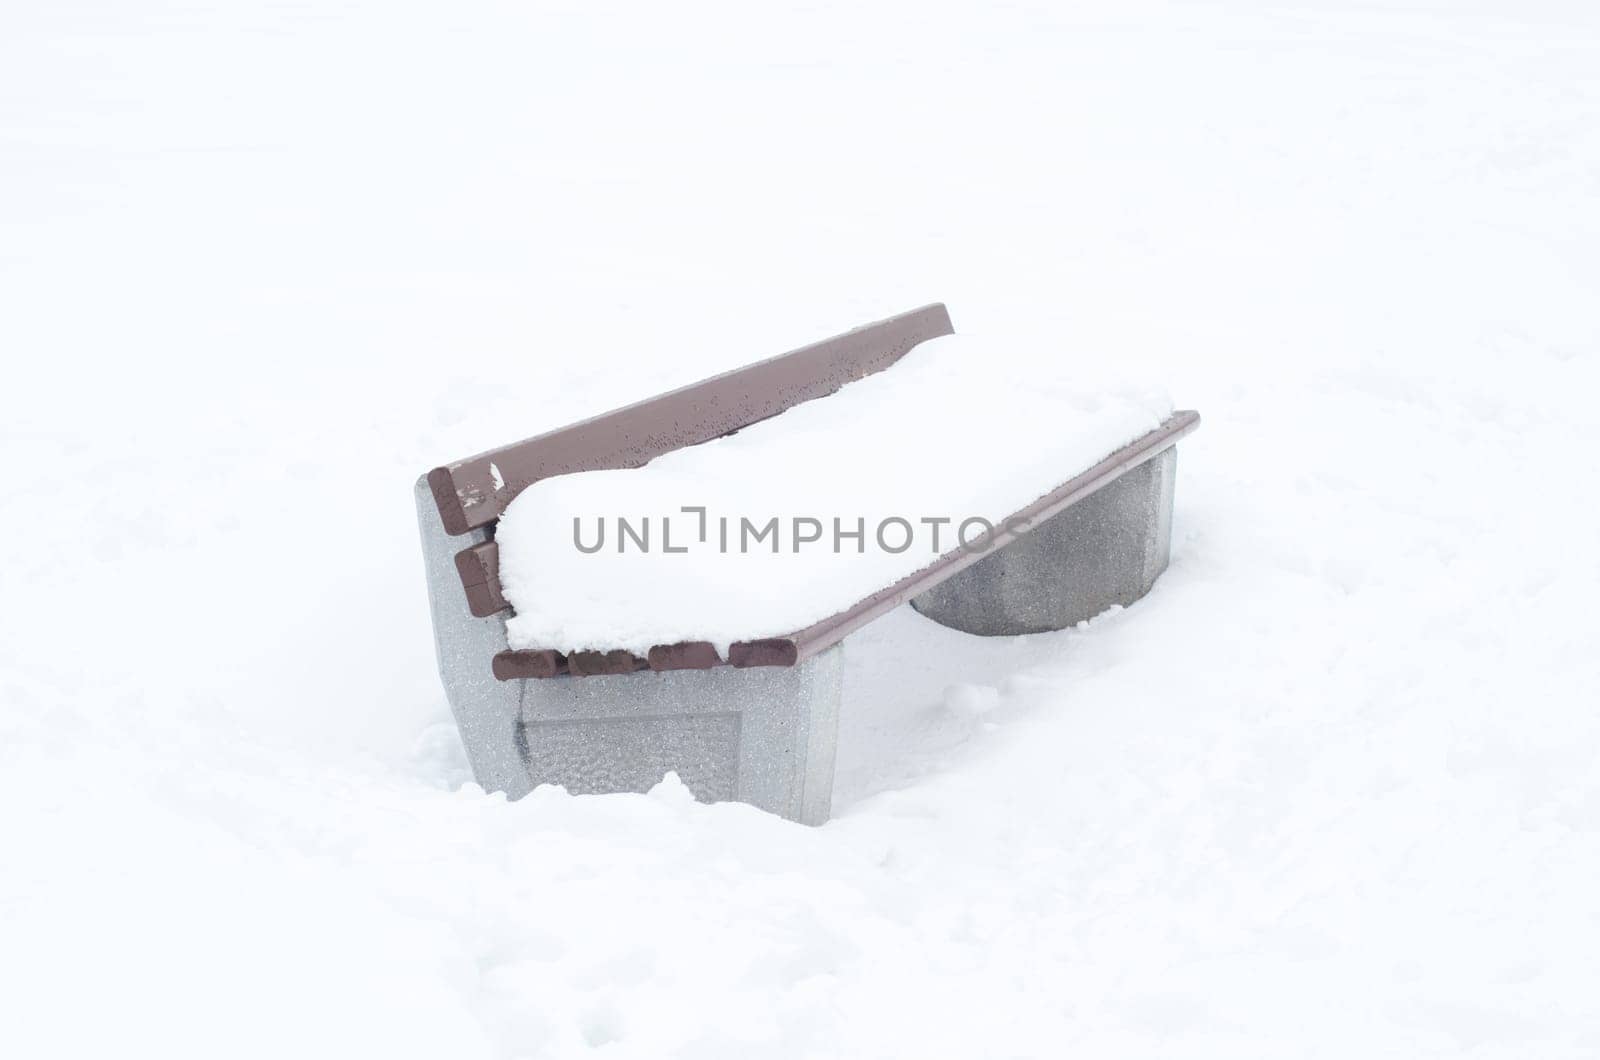 A bench in the park covered with snow in winter. Winter weather and first snow concept.